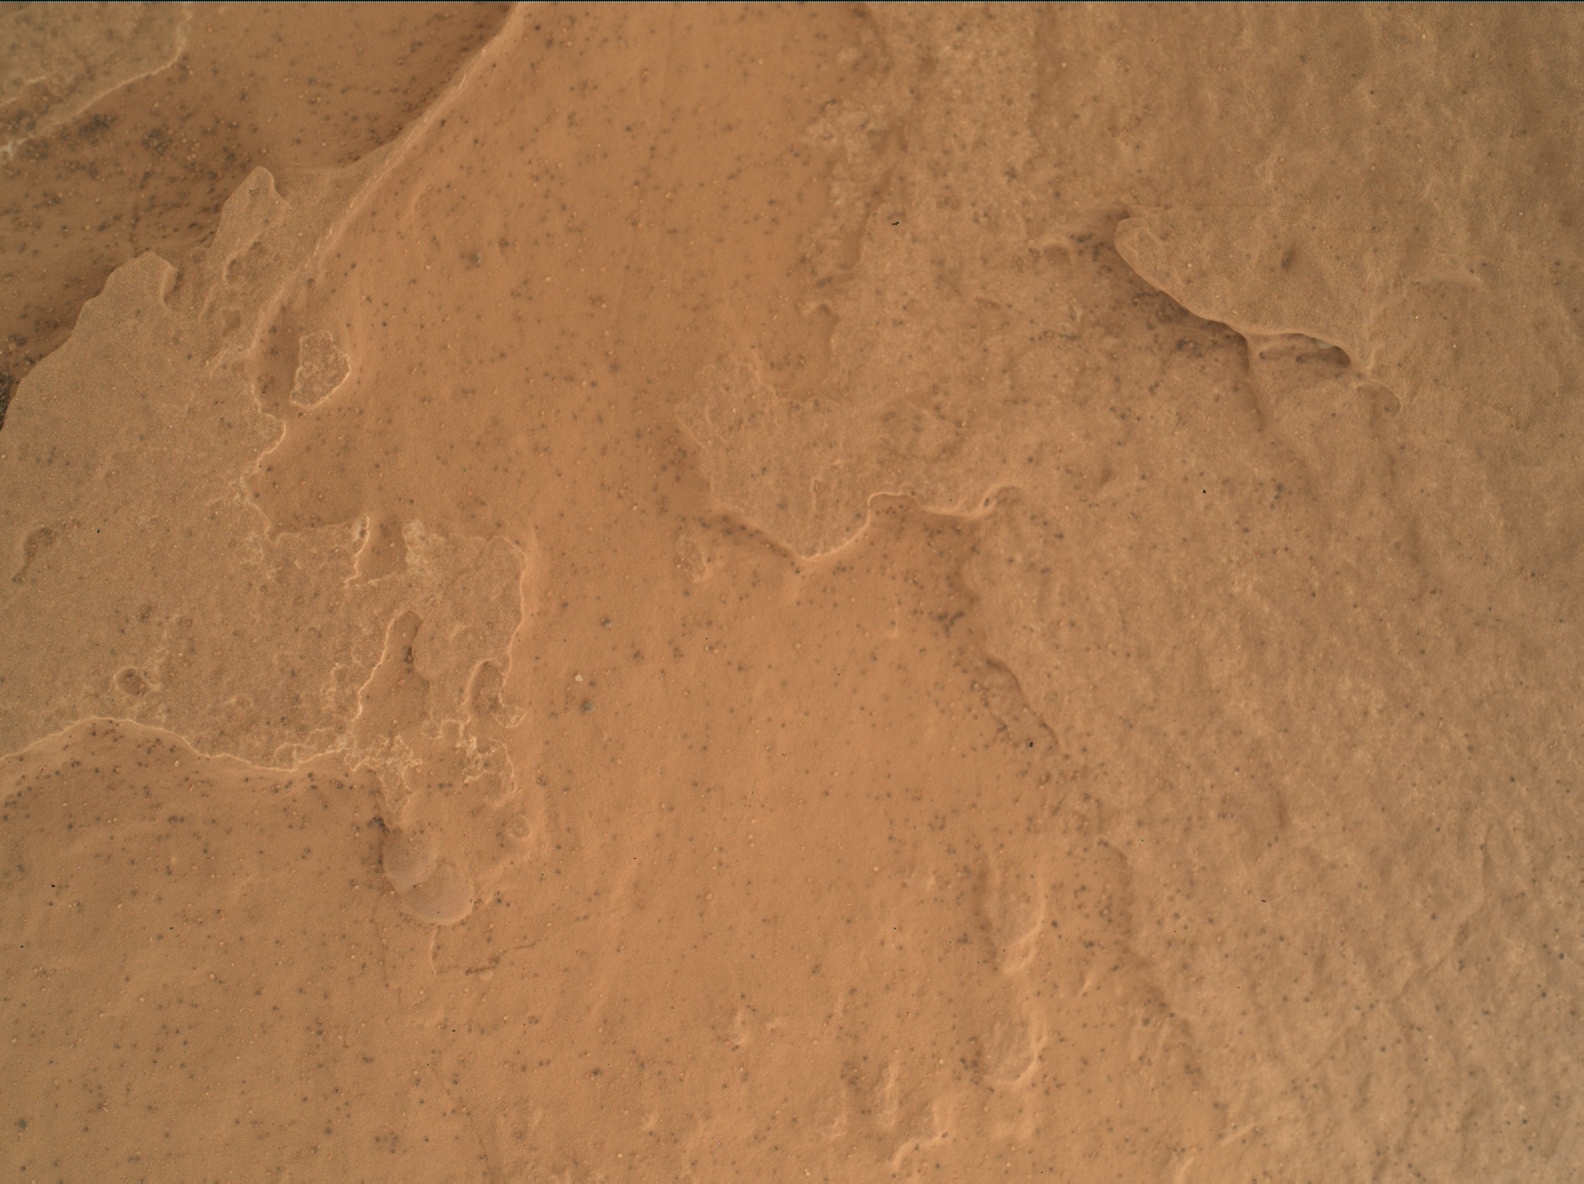 Nasa's Mars rover Curiosity acquired this image using its Mars Hand Lens Imager (MAHLI) on Sol 1734